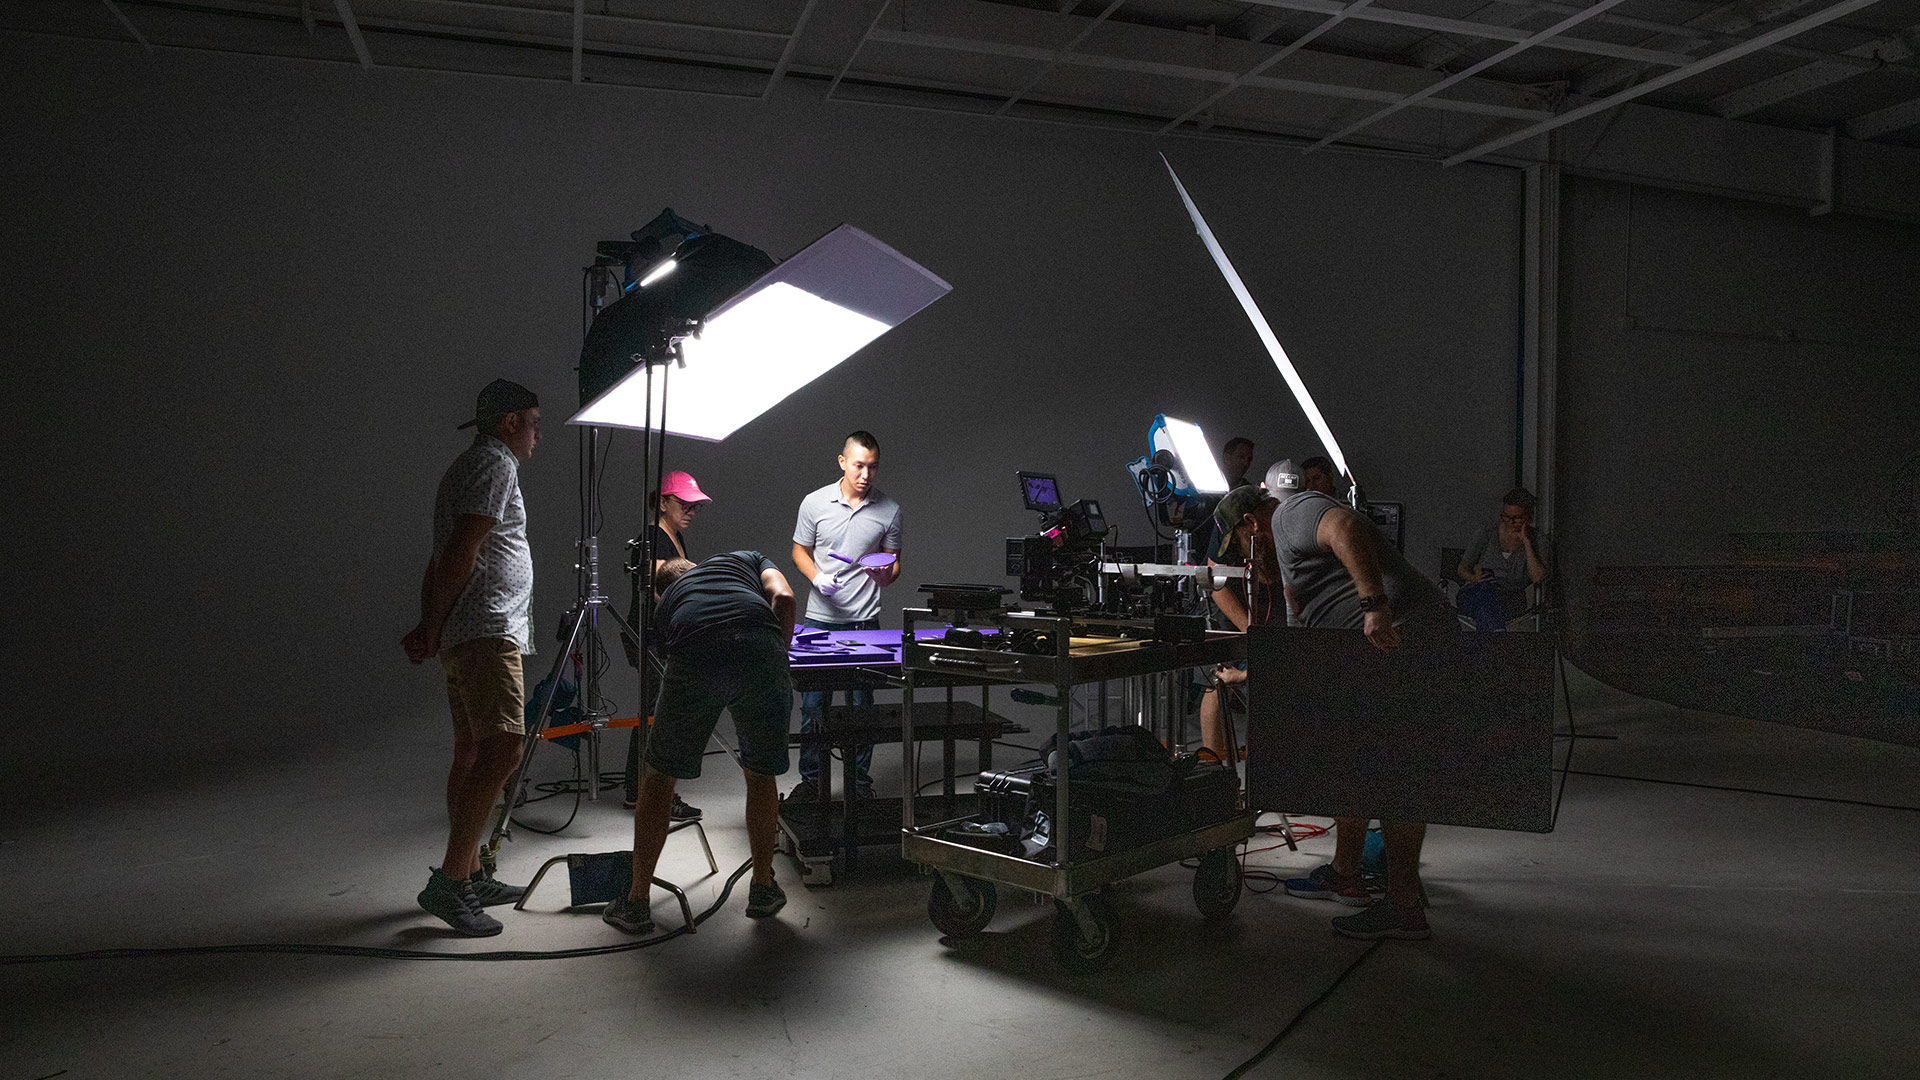 A behind-the-scenes photo of a commercial shoot in the studio. Many lights can be seen illuminating the tabletop.